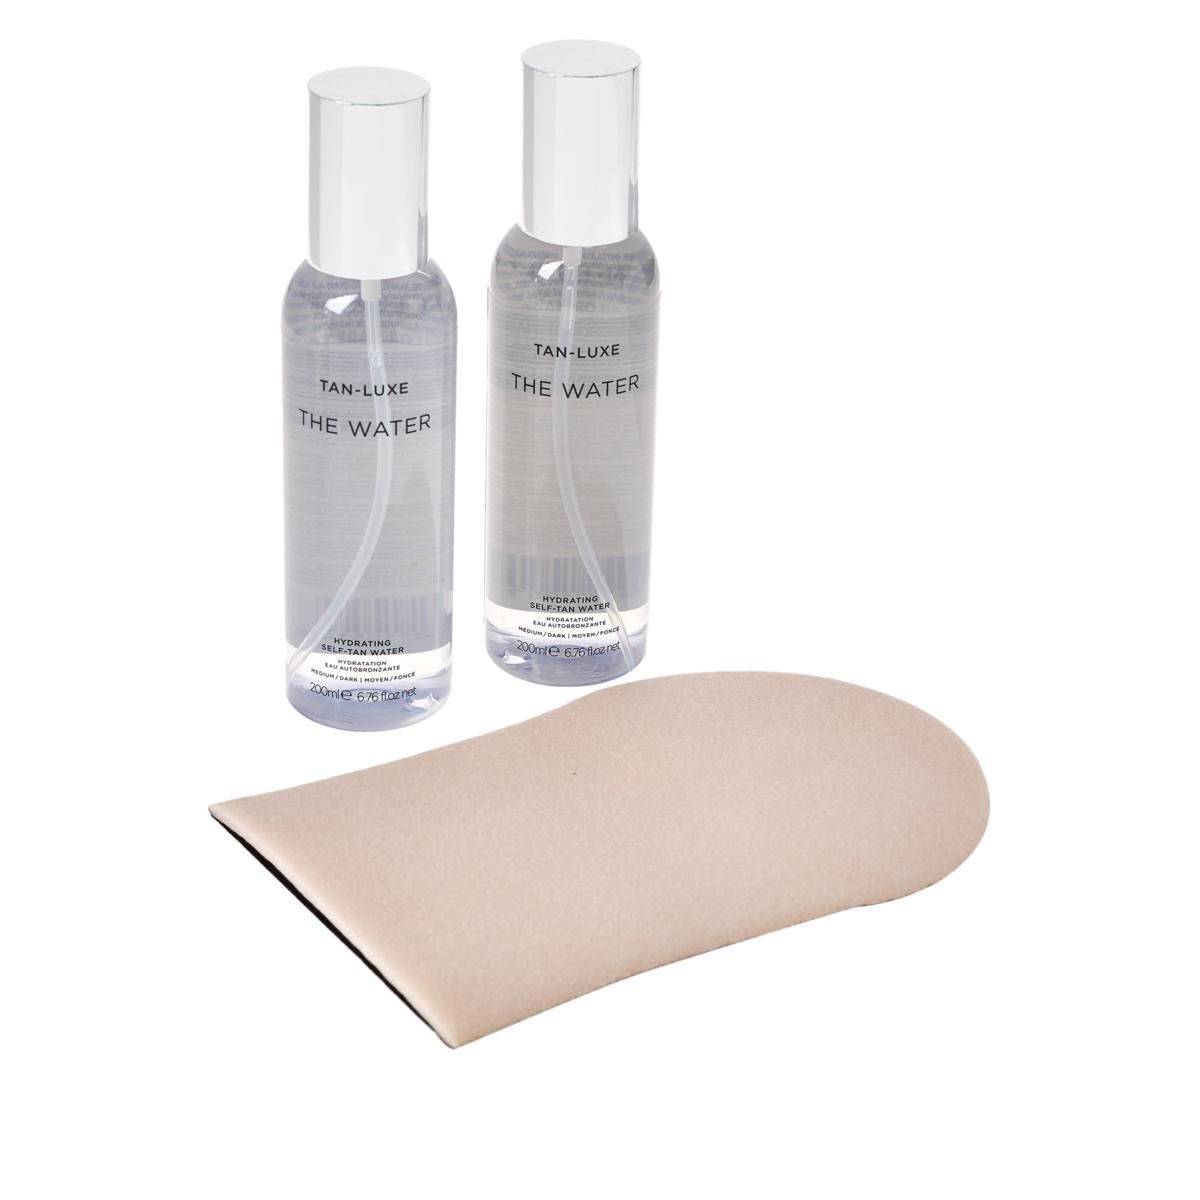 Tan-Luxe 2-pack The Water with Mitt | HSN | HSN